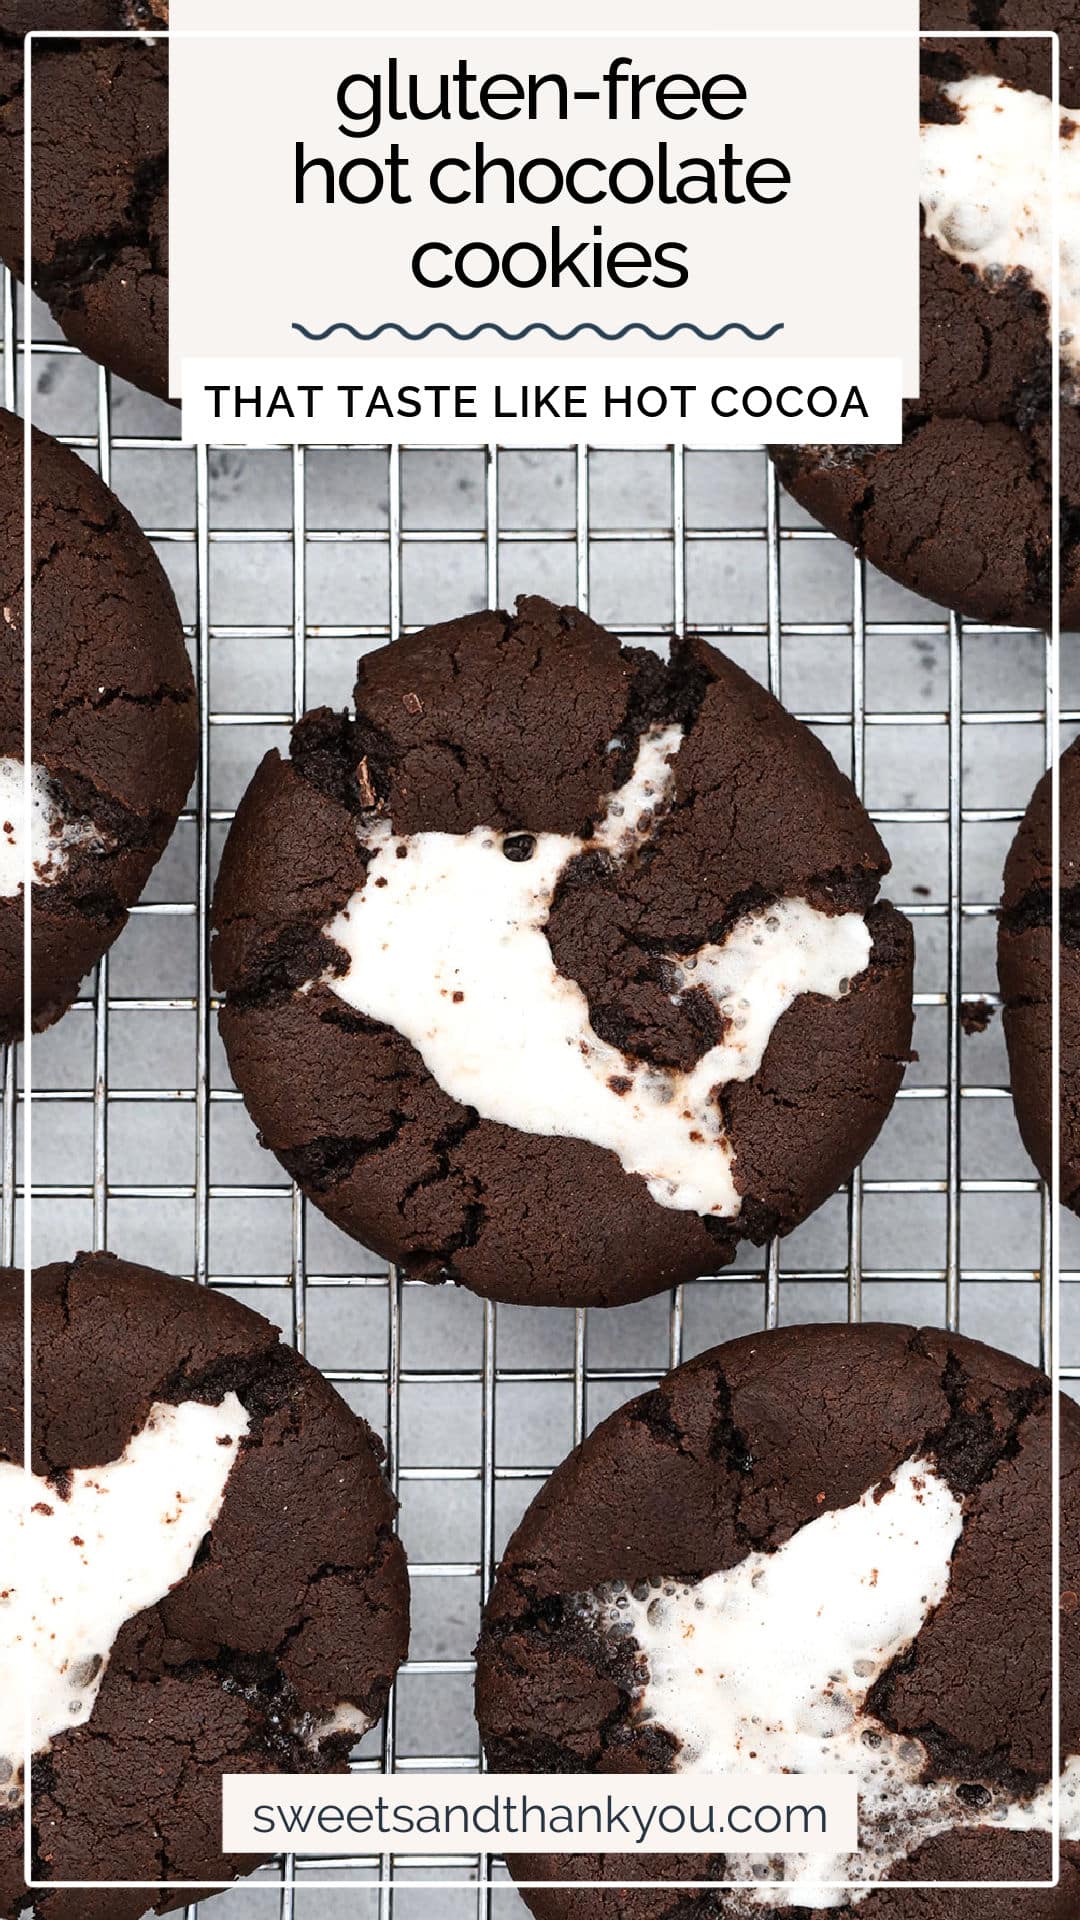 These Gluten-Free Hot Chocolate Cookies taste like a warm cup of hot cocoa in cookie form! Made with fudgy chocolate cookies and a gooey marshmallow center, they're a perfect gluten-free holiday cookie recipe. They look adorable for a gluten-free cookie exchange or holiday cookie plate! 